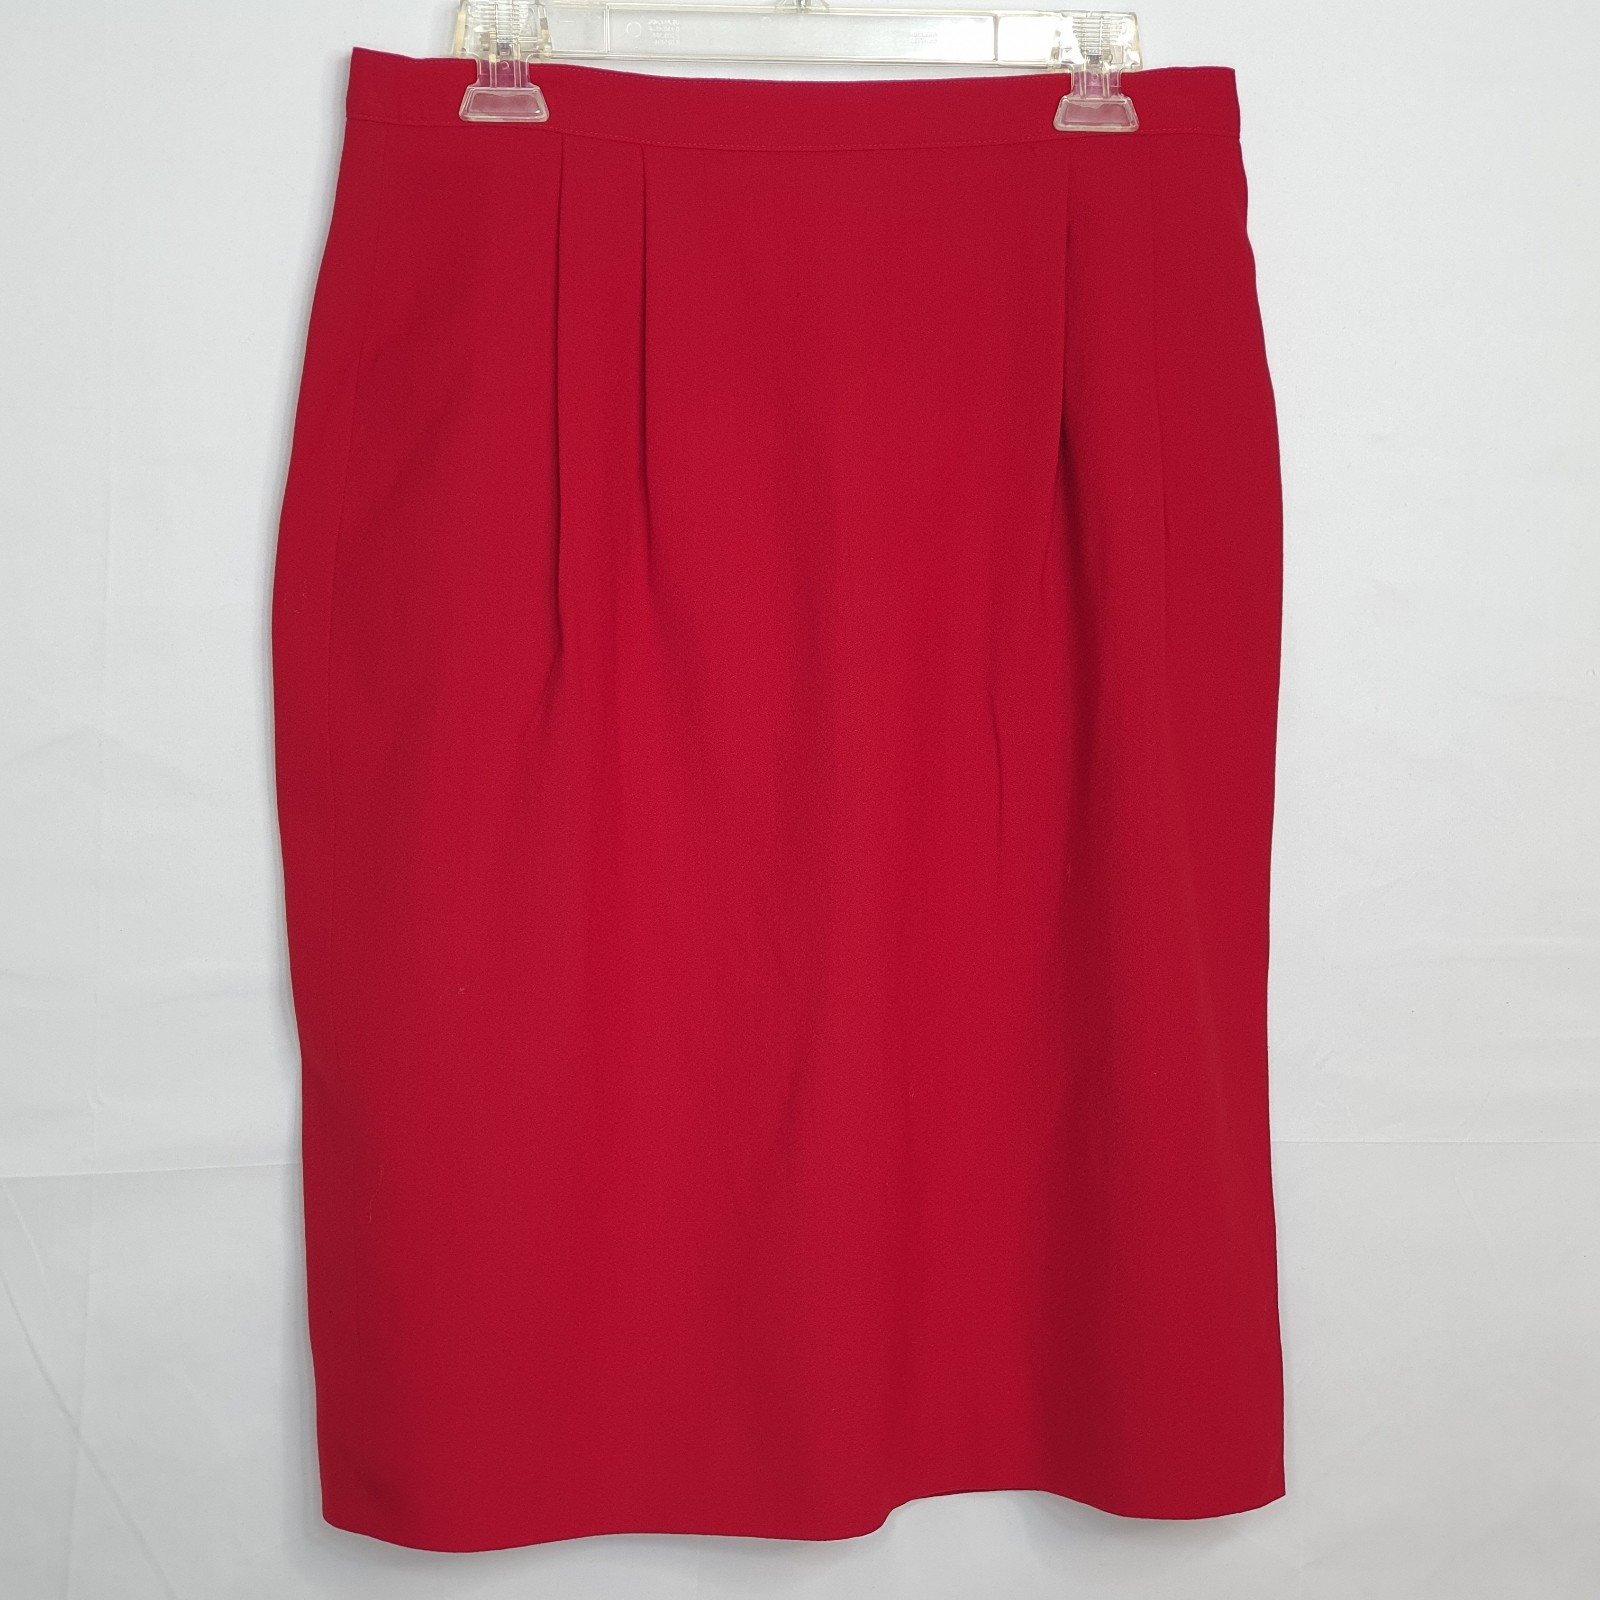 Authentic JH Collectables-Women´s Wool Skirt, Red,